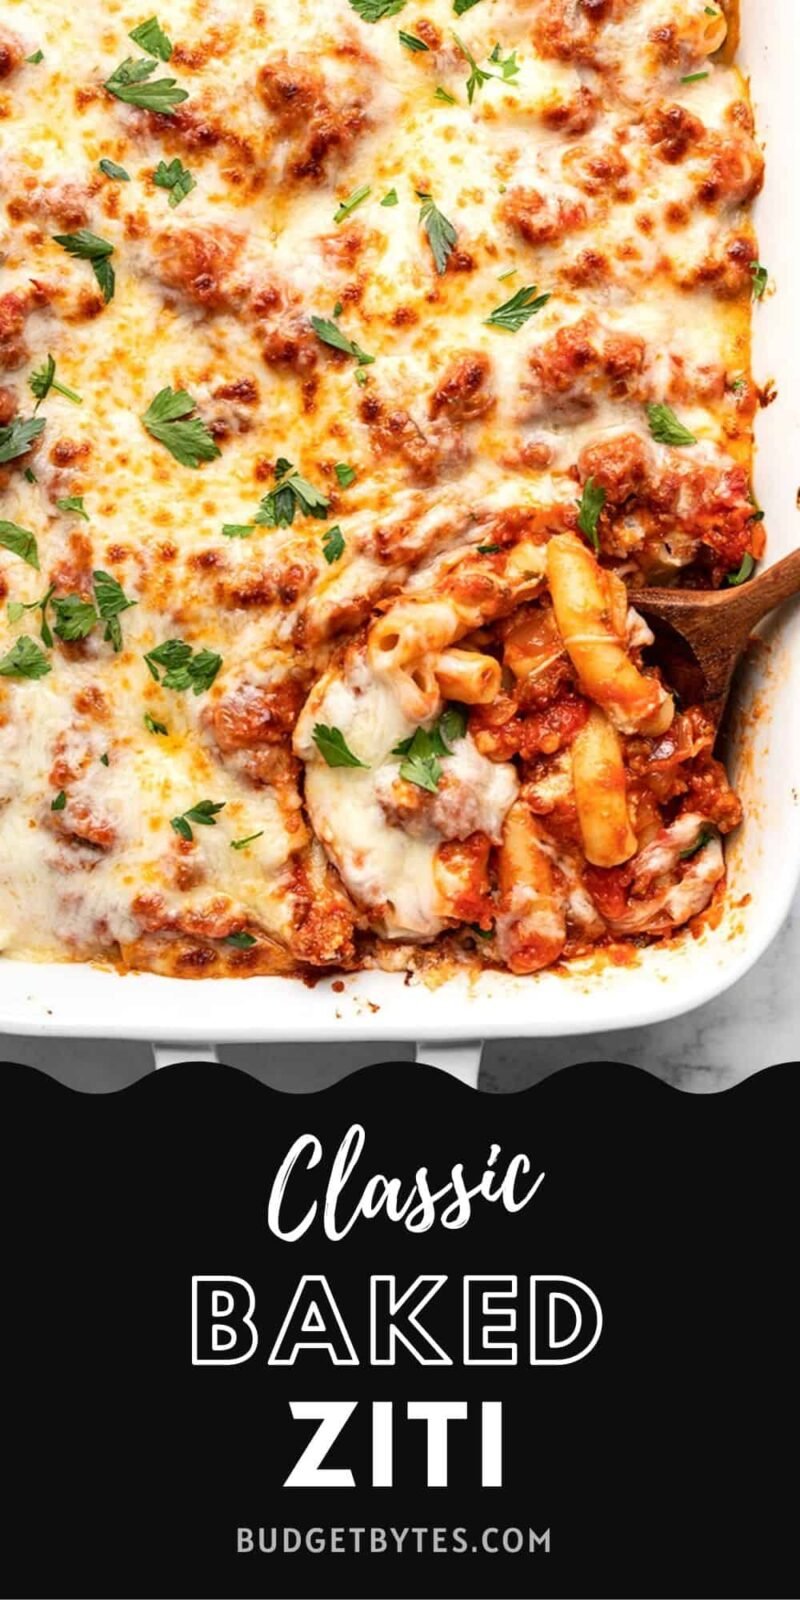 Overhead view of classic baked ziti with spoon, title text at the bottom